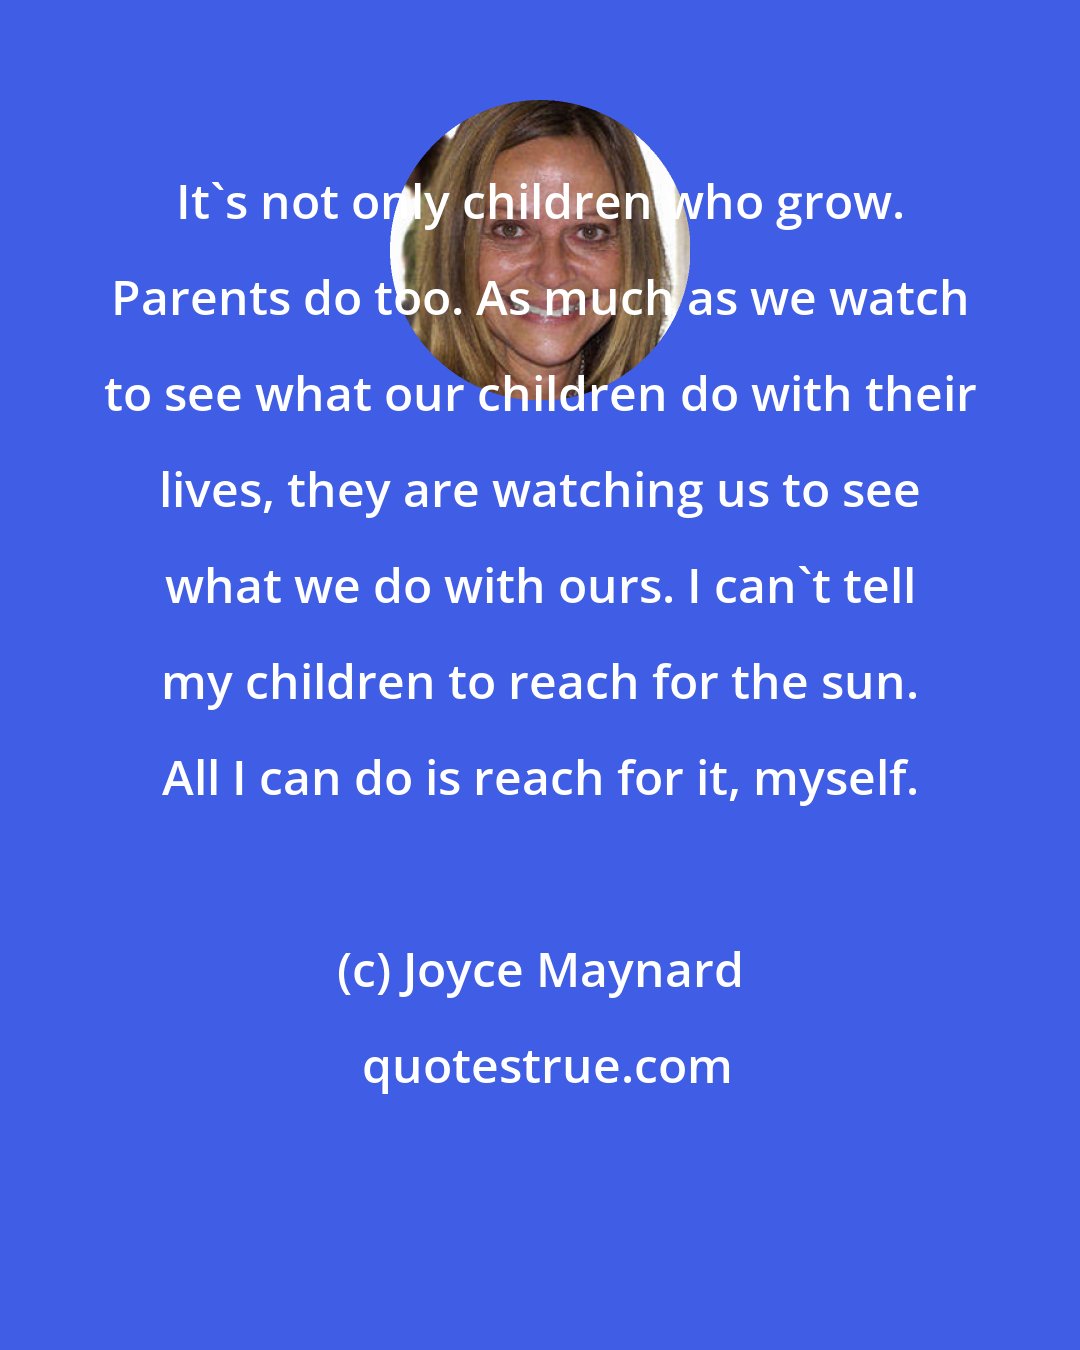 Joyce Maynard: It's not only children who grow. Parents do too. As much as we watch to see what our children do with their lives, they are watching us to see what we do with ours. I can't tell my children to reach for the sun. All I can do is reach for it, myself.